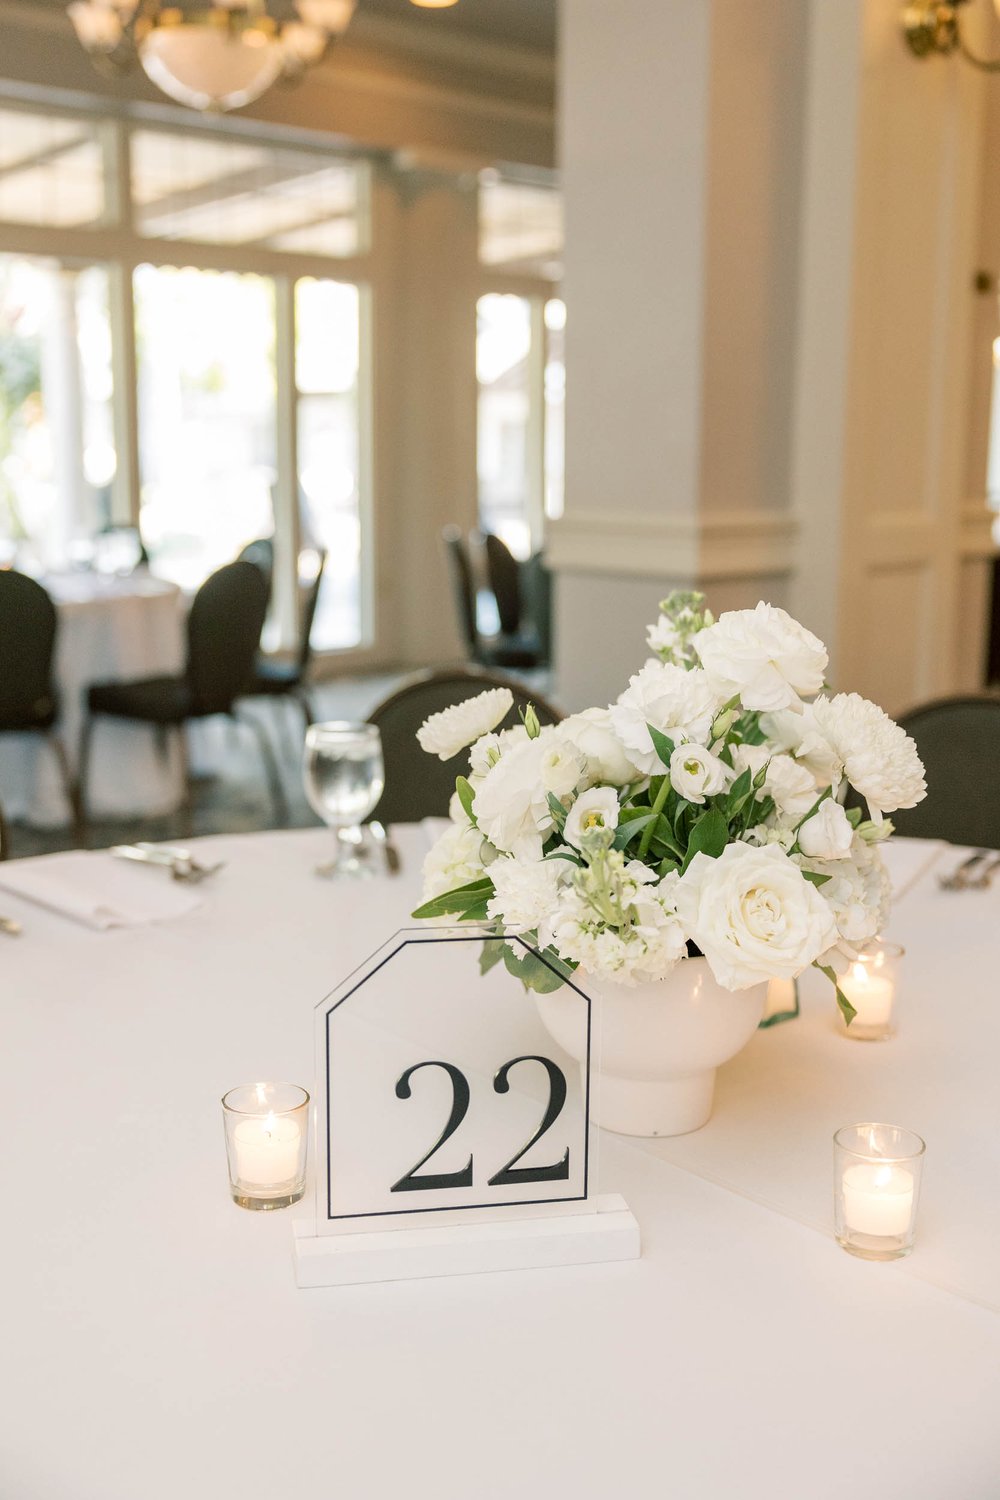  a chic wedding reception tablescape with white florals and linens, and a geometric acrylic table number 